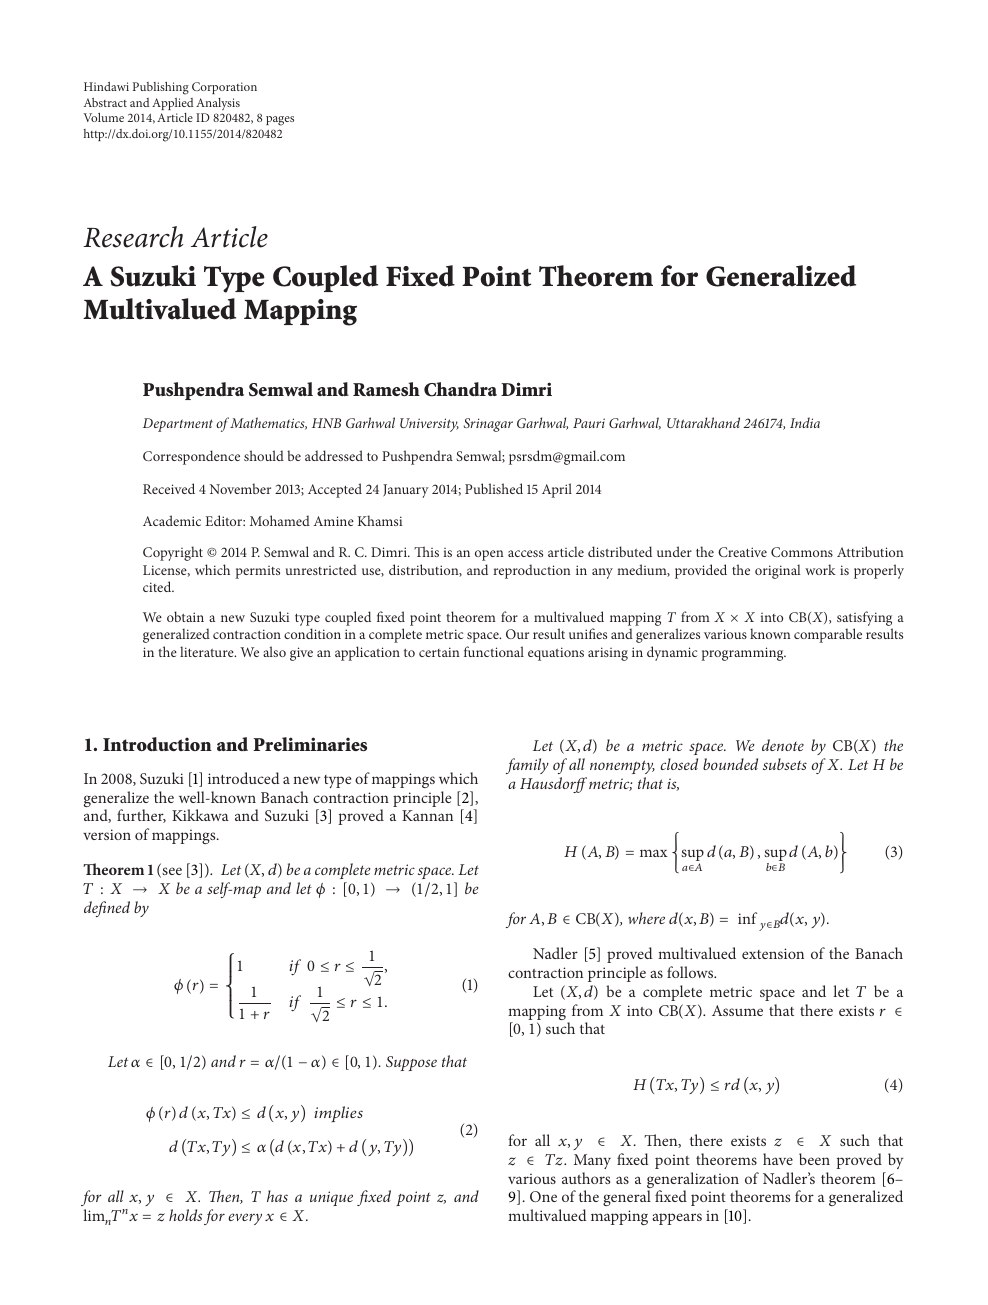 A Suzuki Type Coupled Fixed Point Theorem For Generalized Multivalued Mapping Topic Of Research Paper In Mathematics Download Scholarly Article Pdf And Read For Free On Cyberleninka Open Science Hub